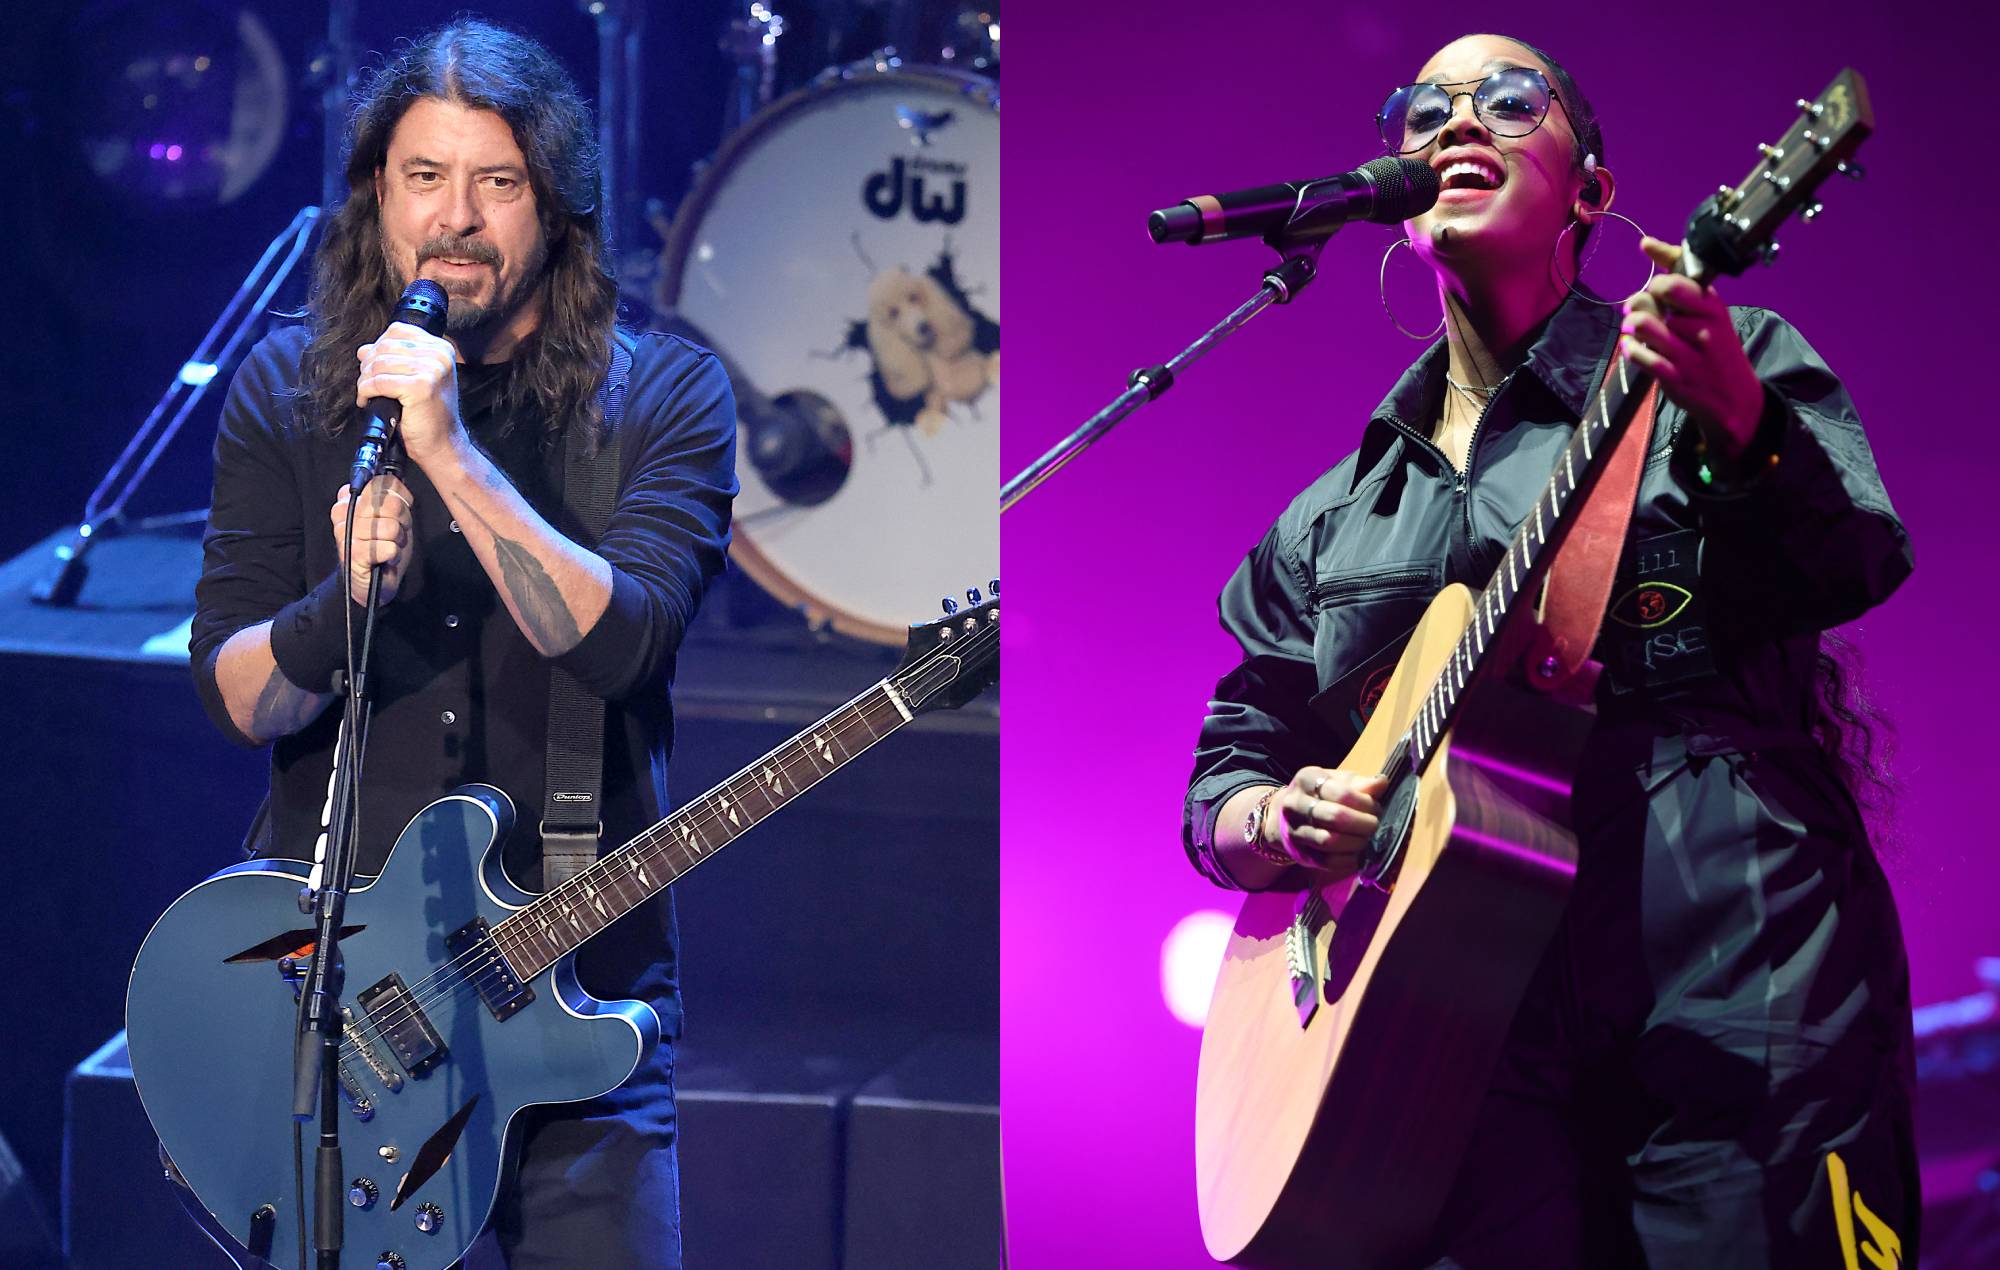 Watch H.E.R. join Foo Fighters to perform ‘The Glass’ on ‘SNL’